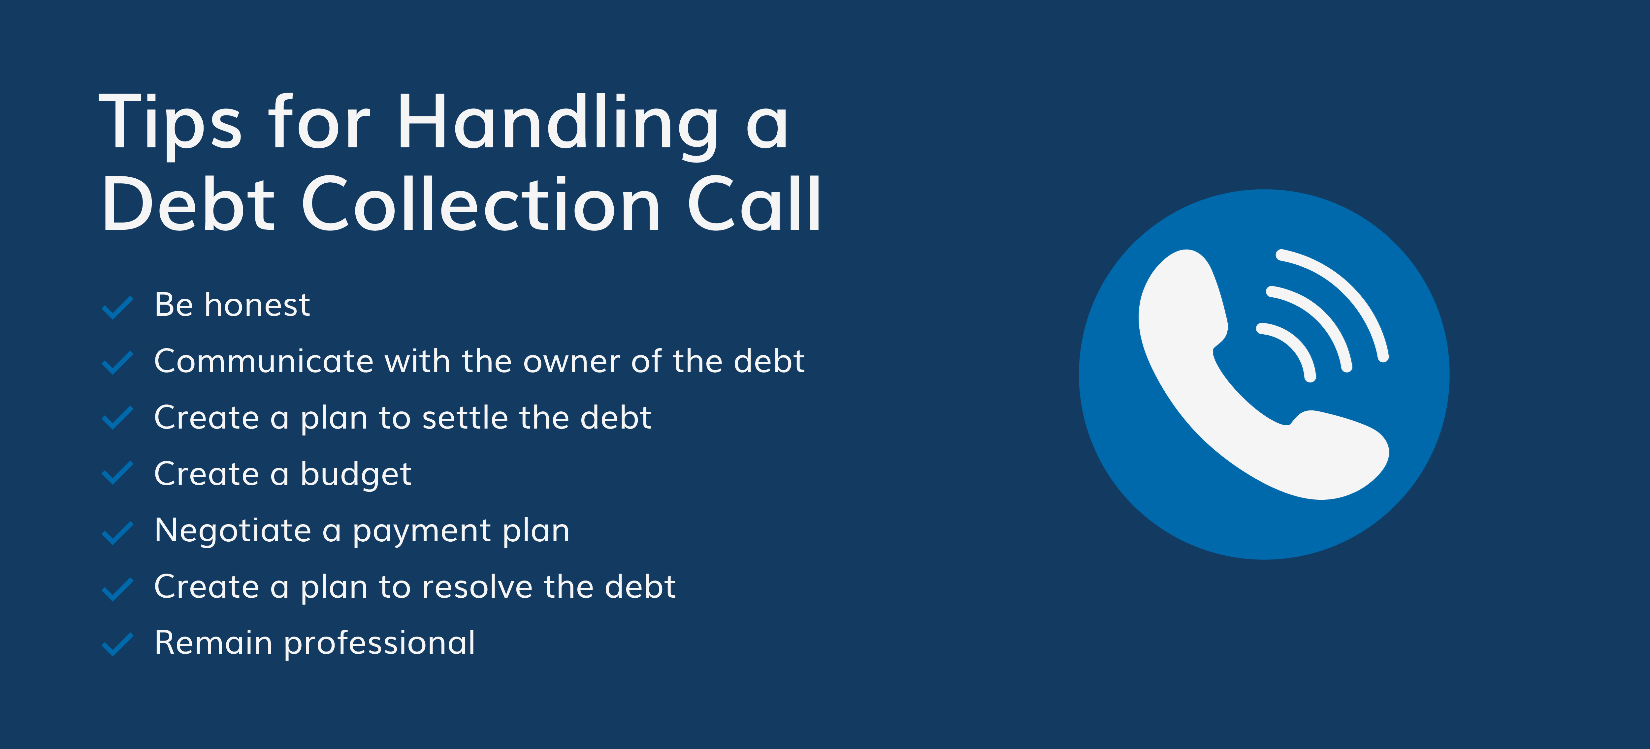 Tips for handling a debt collection call